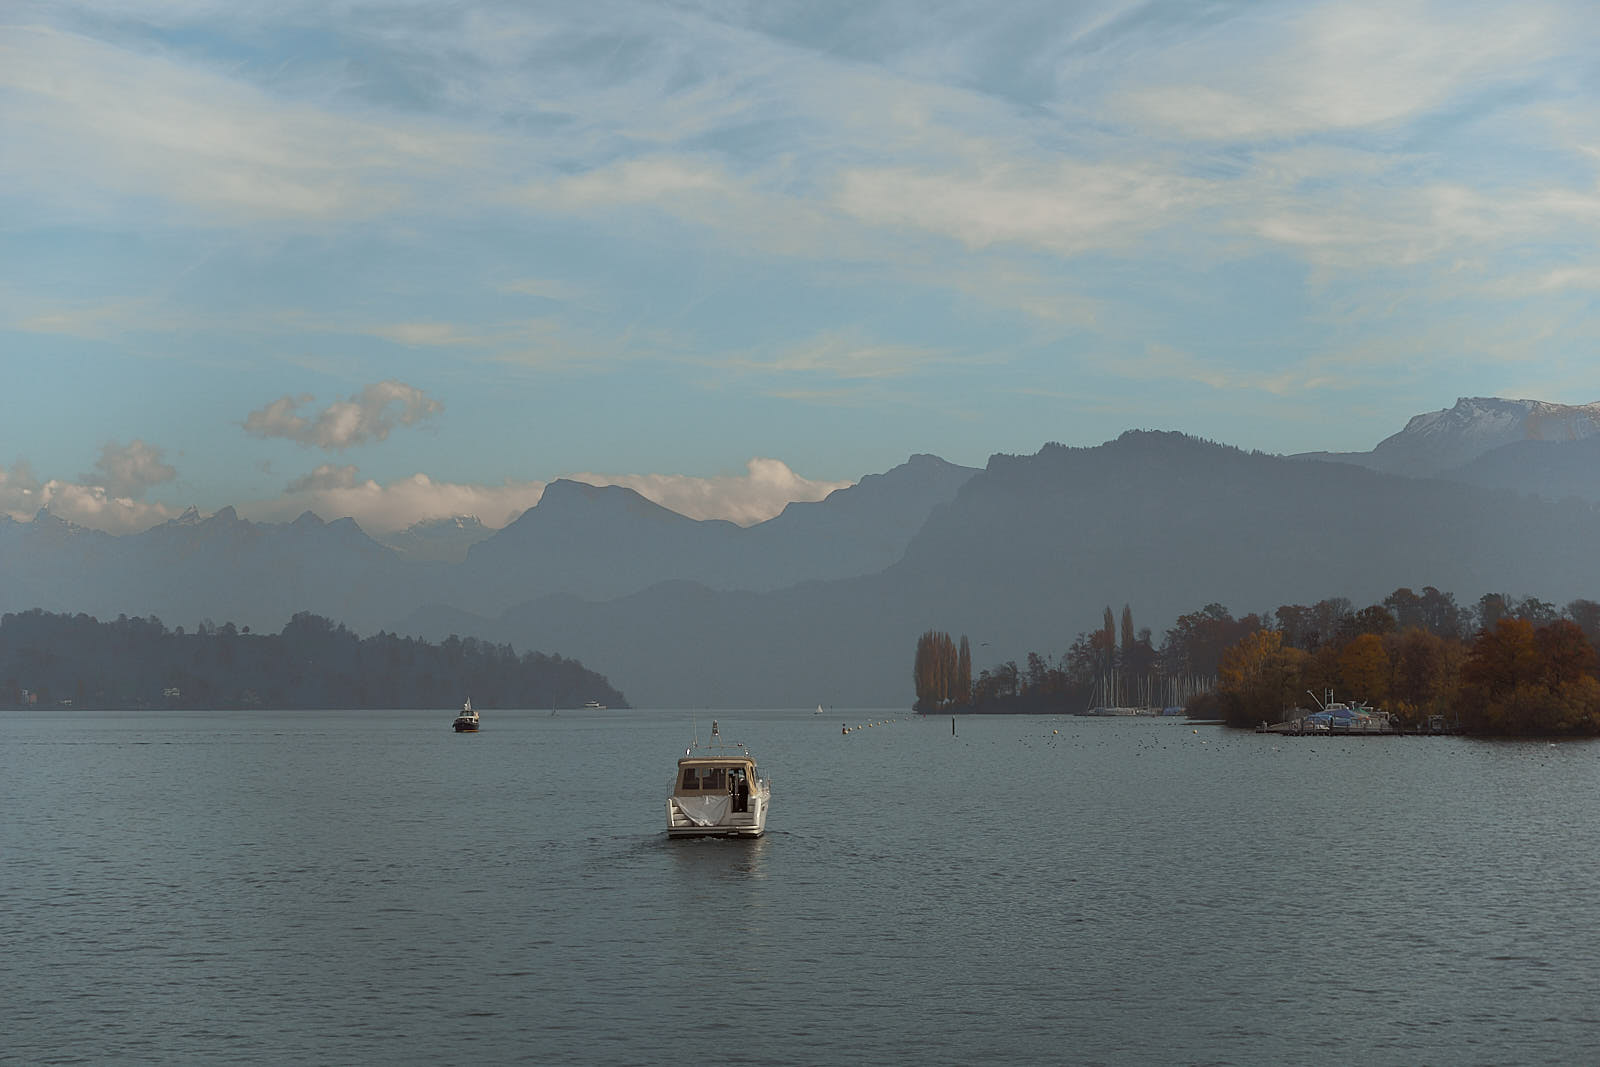 view from the water in Luzern